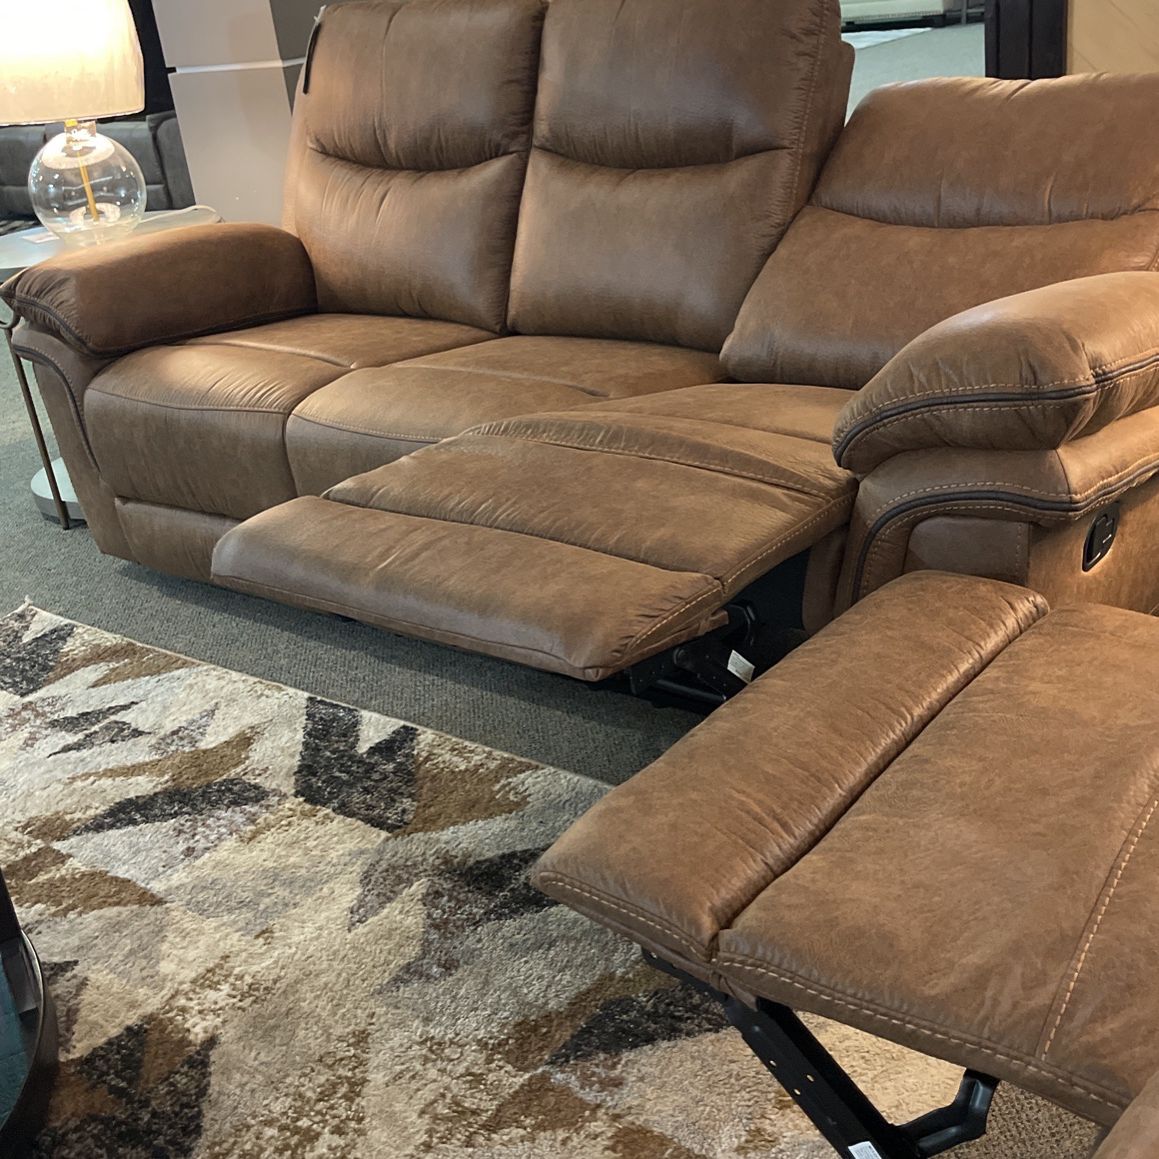 Brand New Reclining Sofa Love Set - Ask For Financing 